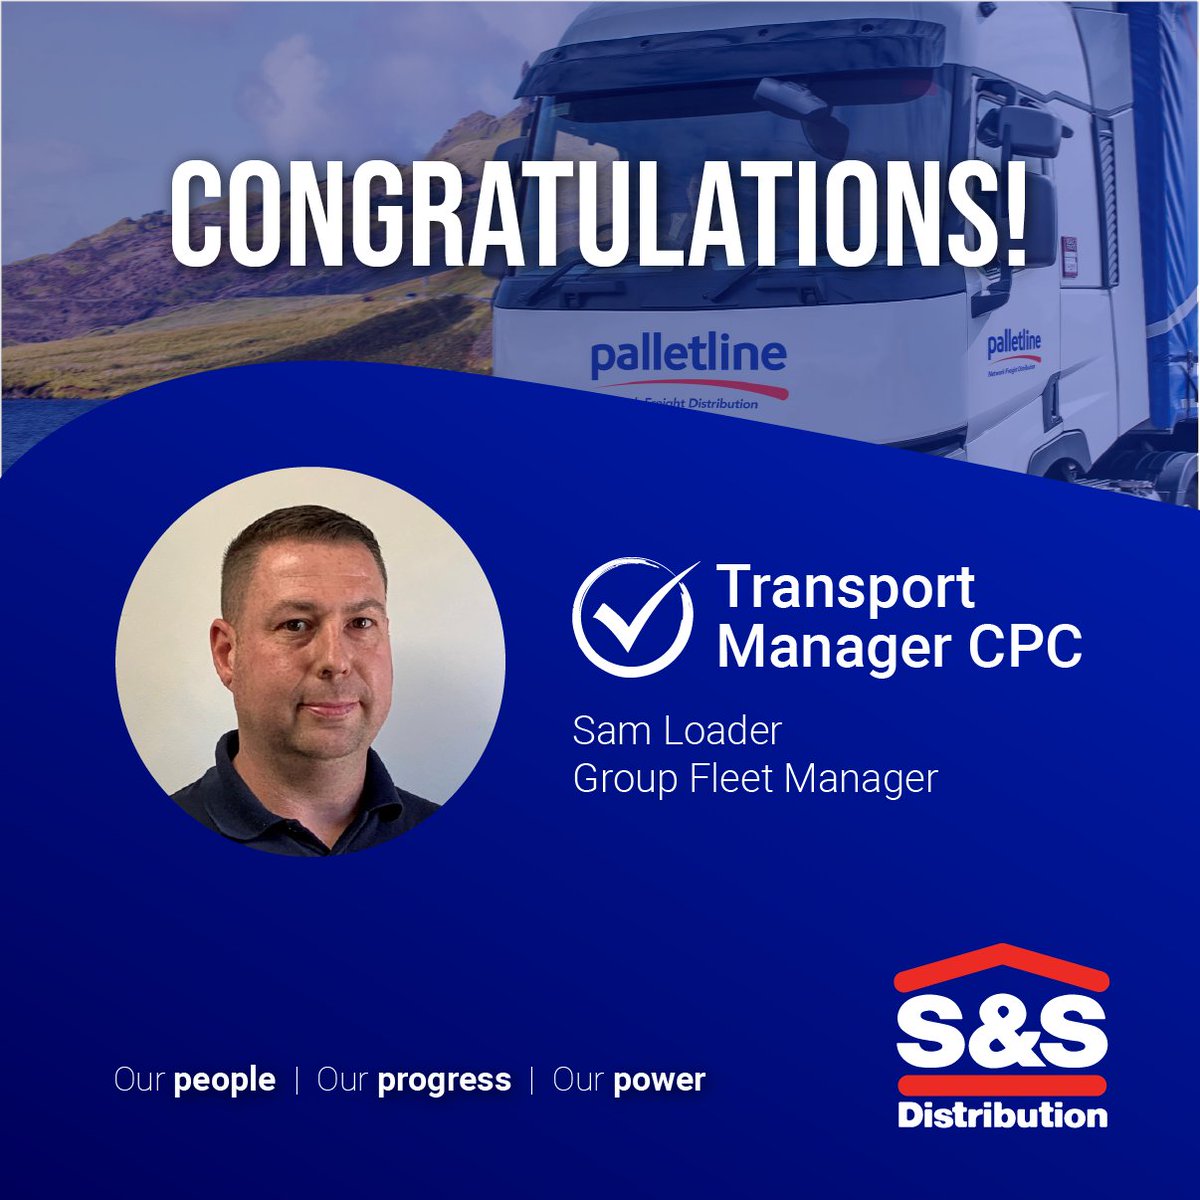 Well done to Sam Loader - Group Fleet Manager at Palletline Logistics, for completing his Transport Manager CPC.🏅

#Transport #Logistics #TransportManager